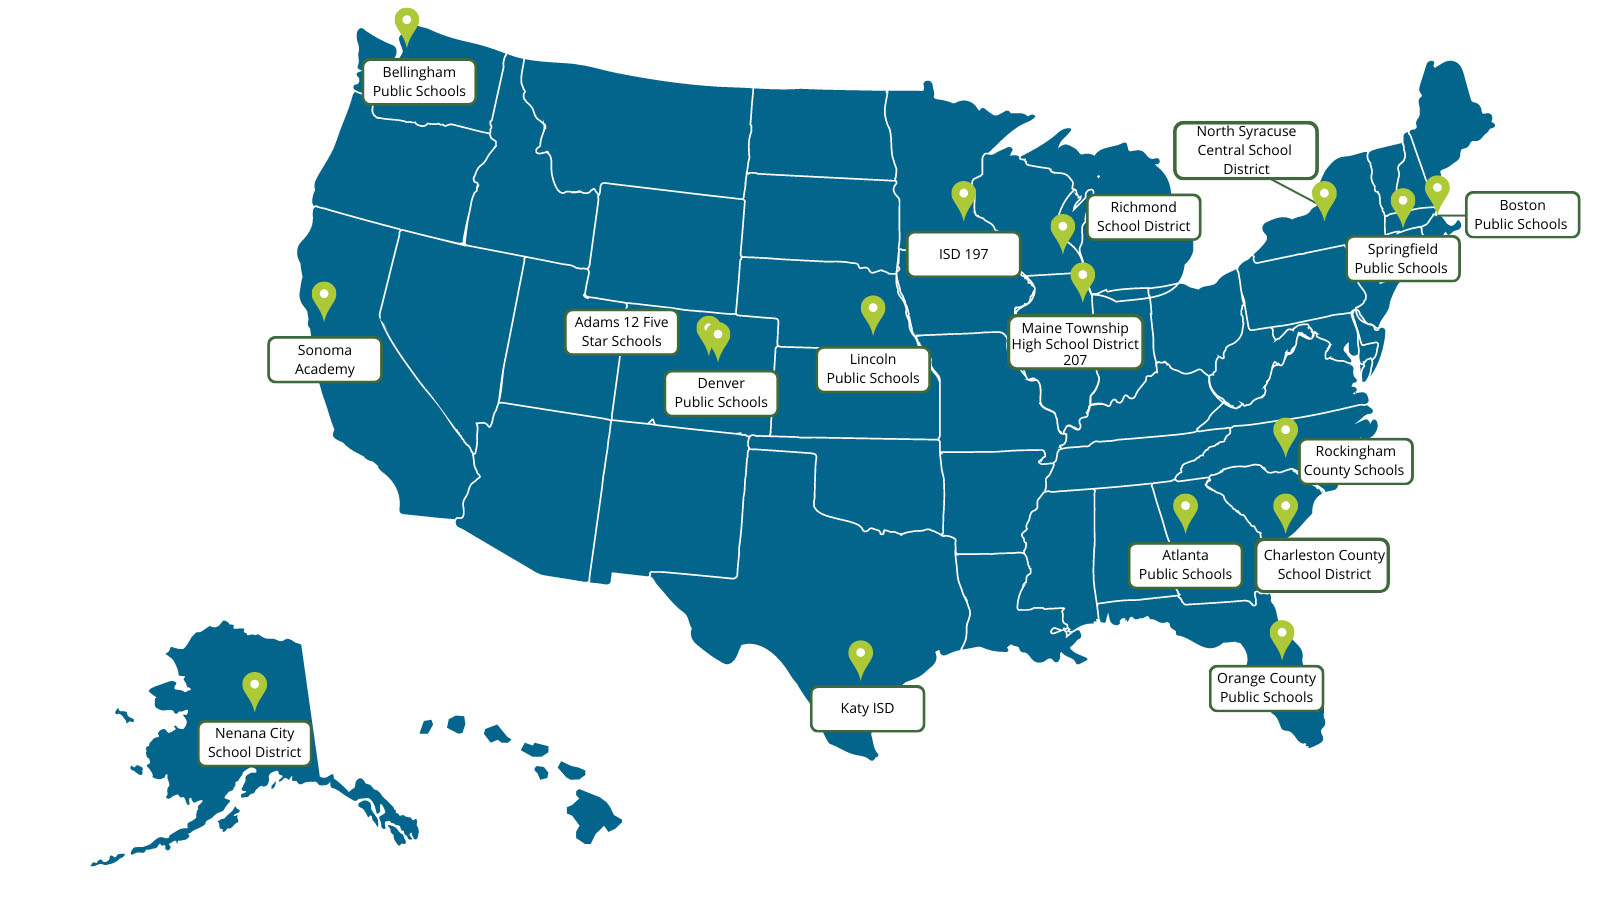 Map of where awardees are located - all over the U.S.